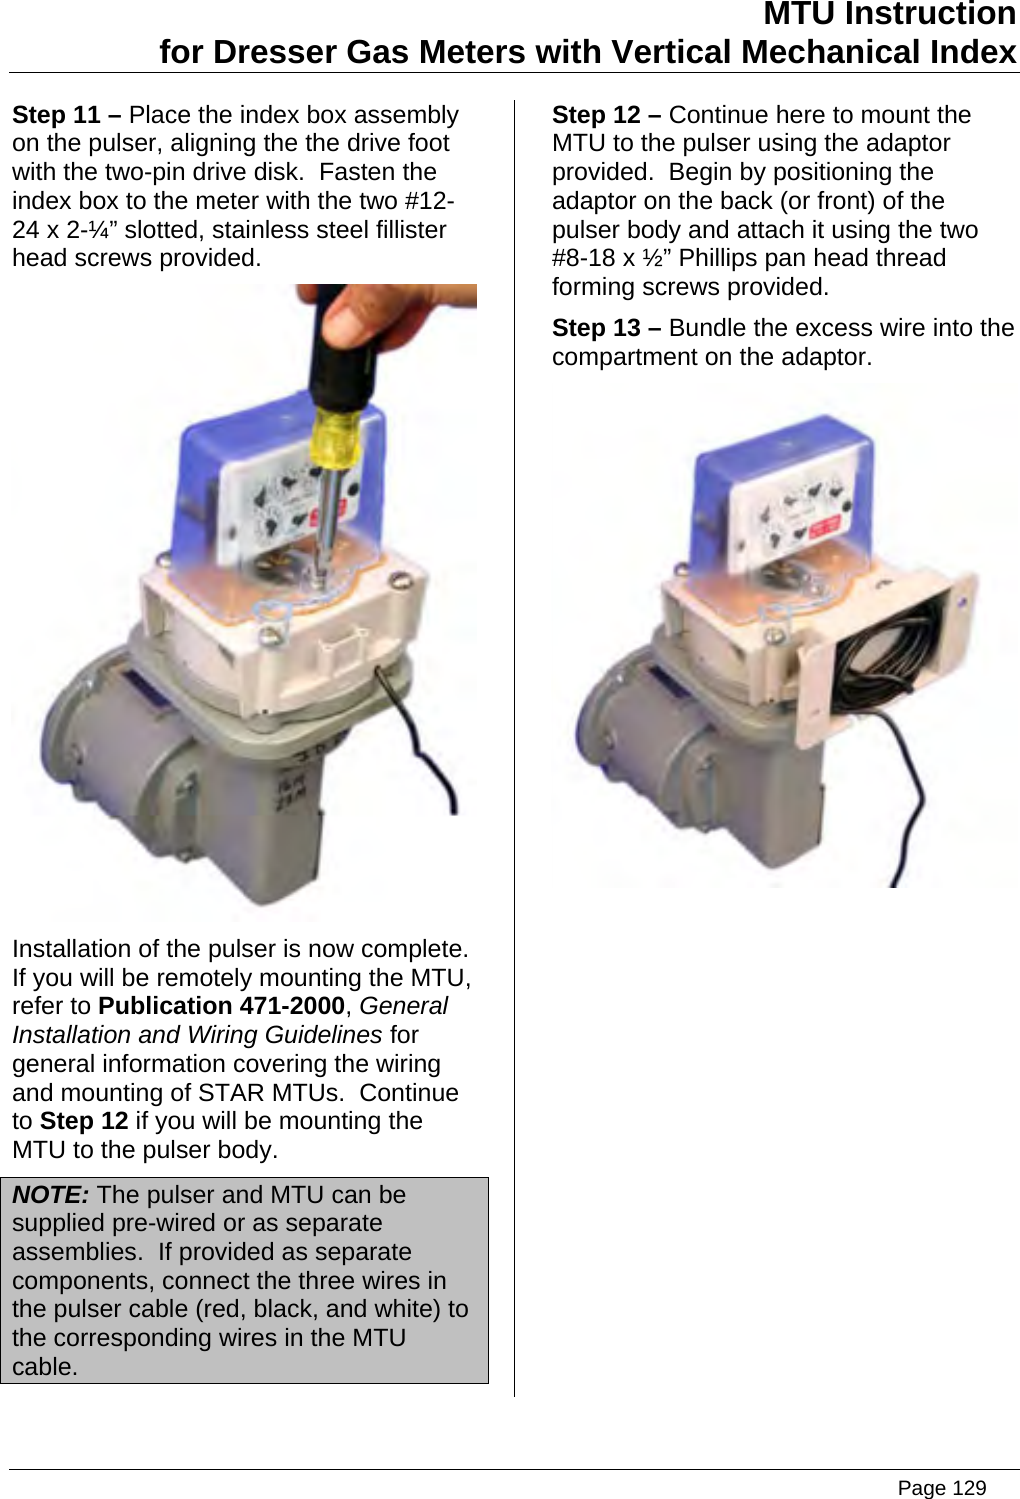 Page 129 of Aclara Technologies 09015 Transmitter for Meter Reading User Manual users manual